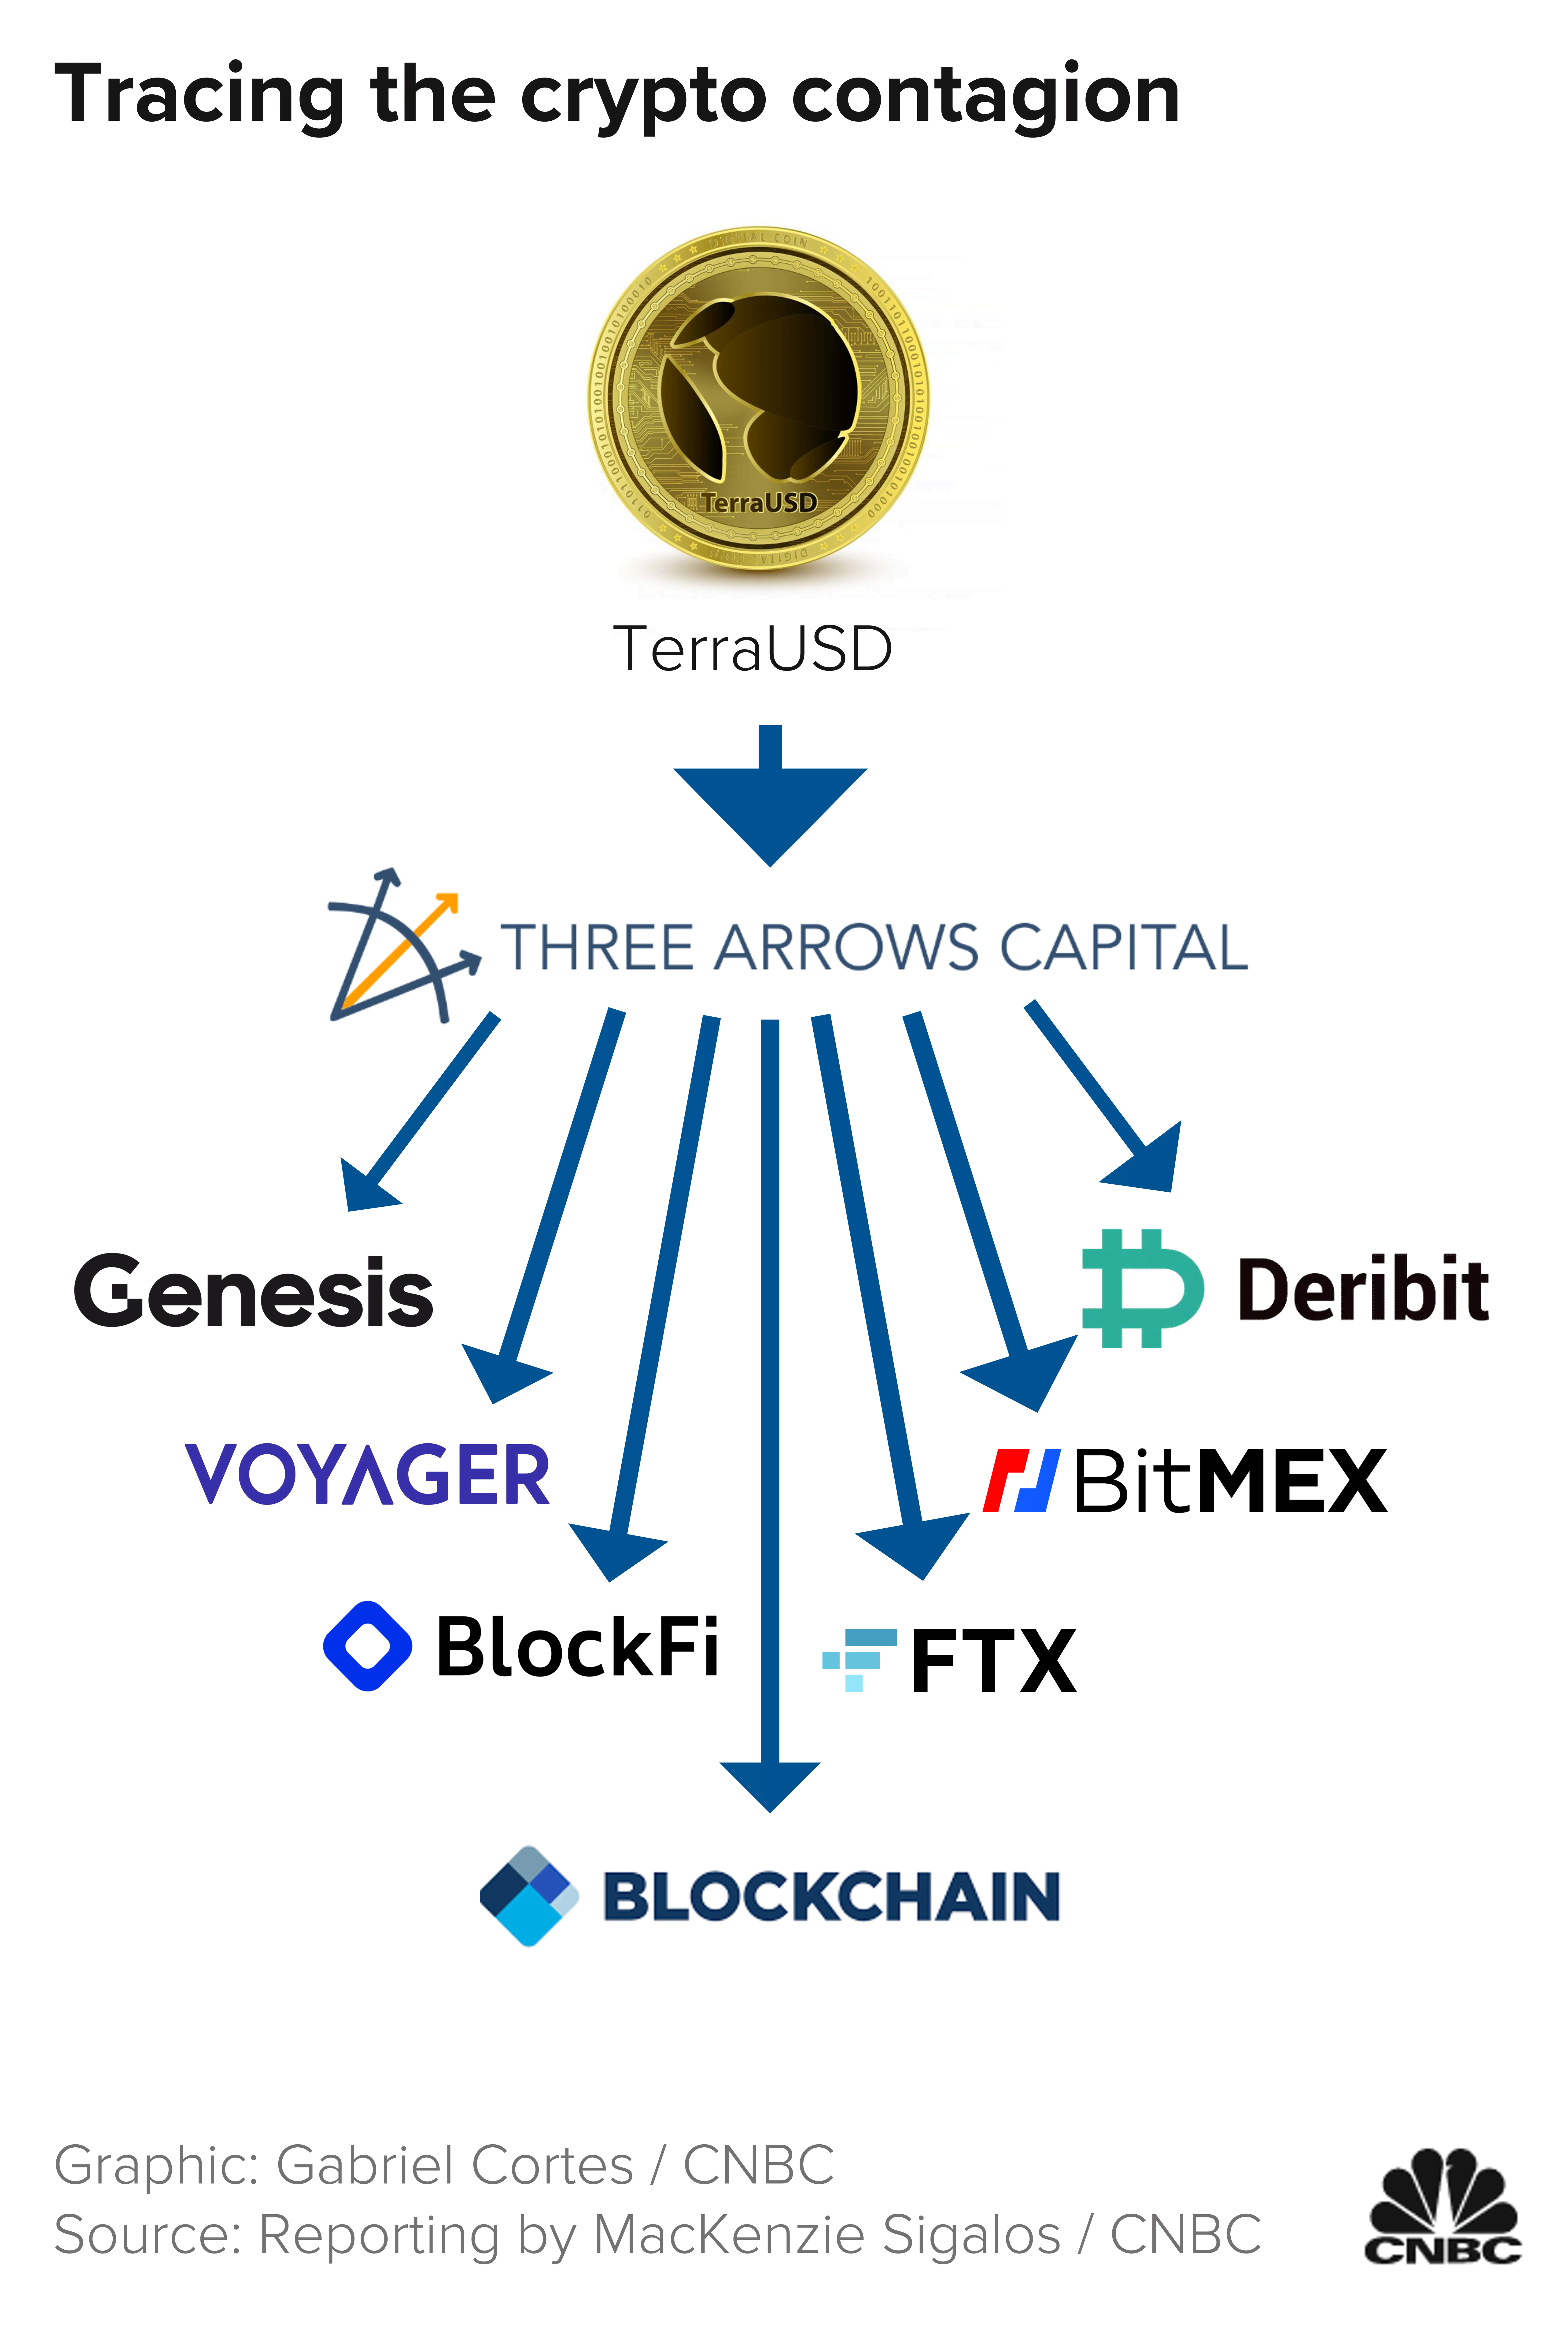 The flowchart shows the crypto firms affected by the implosion of TerraUSD and 3 Arrows Capital's bankruptcy filing.